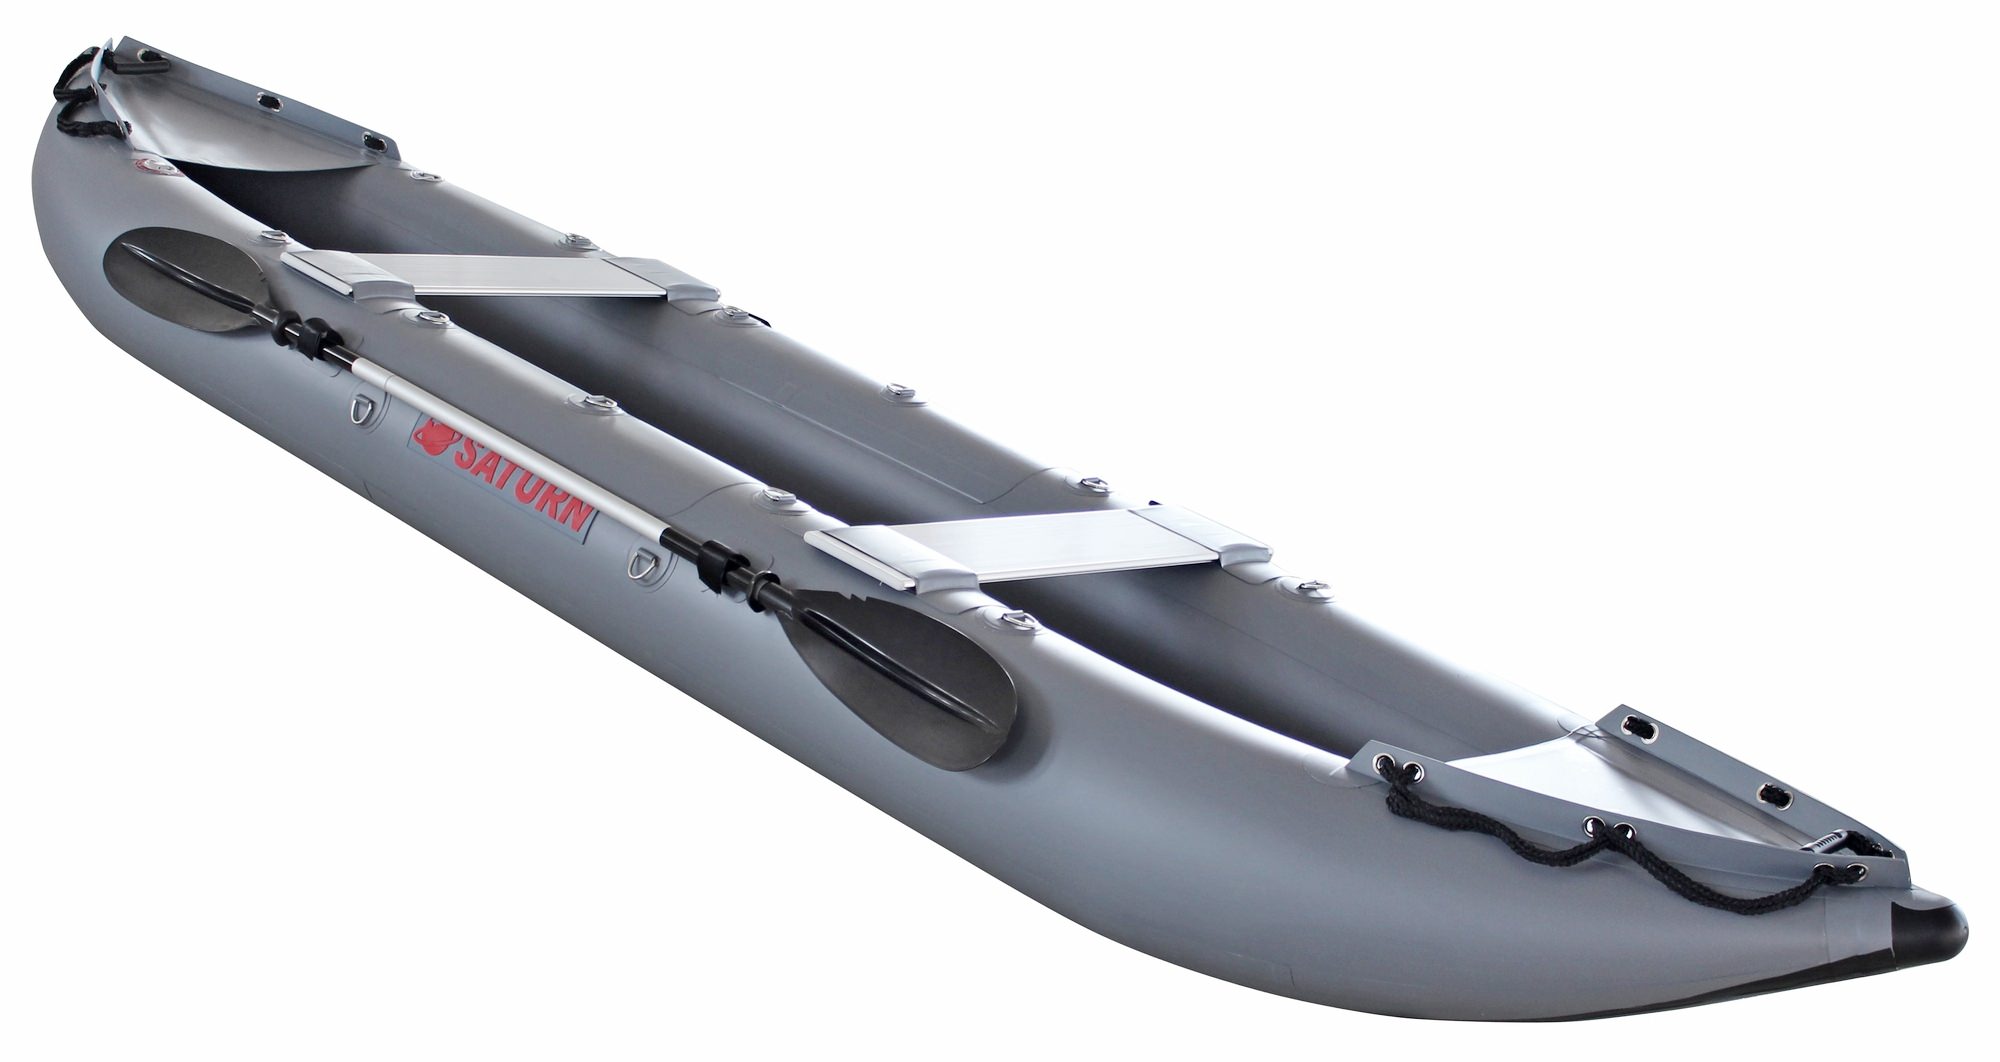 Cheap Fishing Boat Two People Rigid Plastic Boats Double Polycarbonate Canoe  Pedal Kayak - China Fishing Kayak and Kayak for Sale price